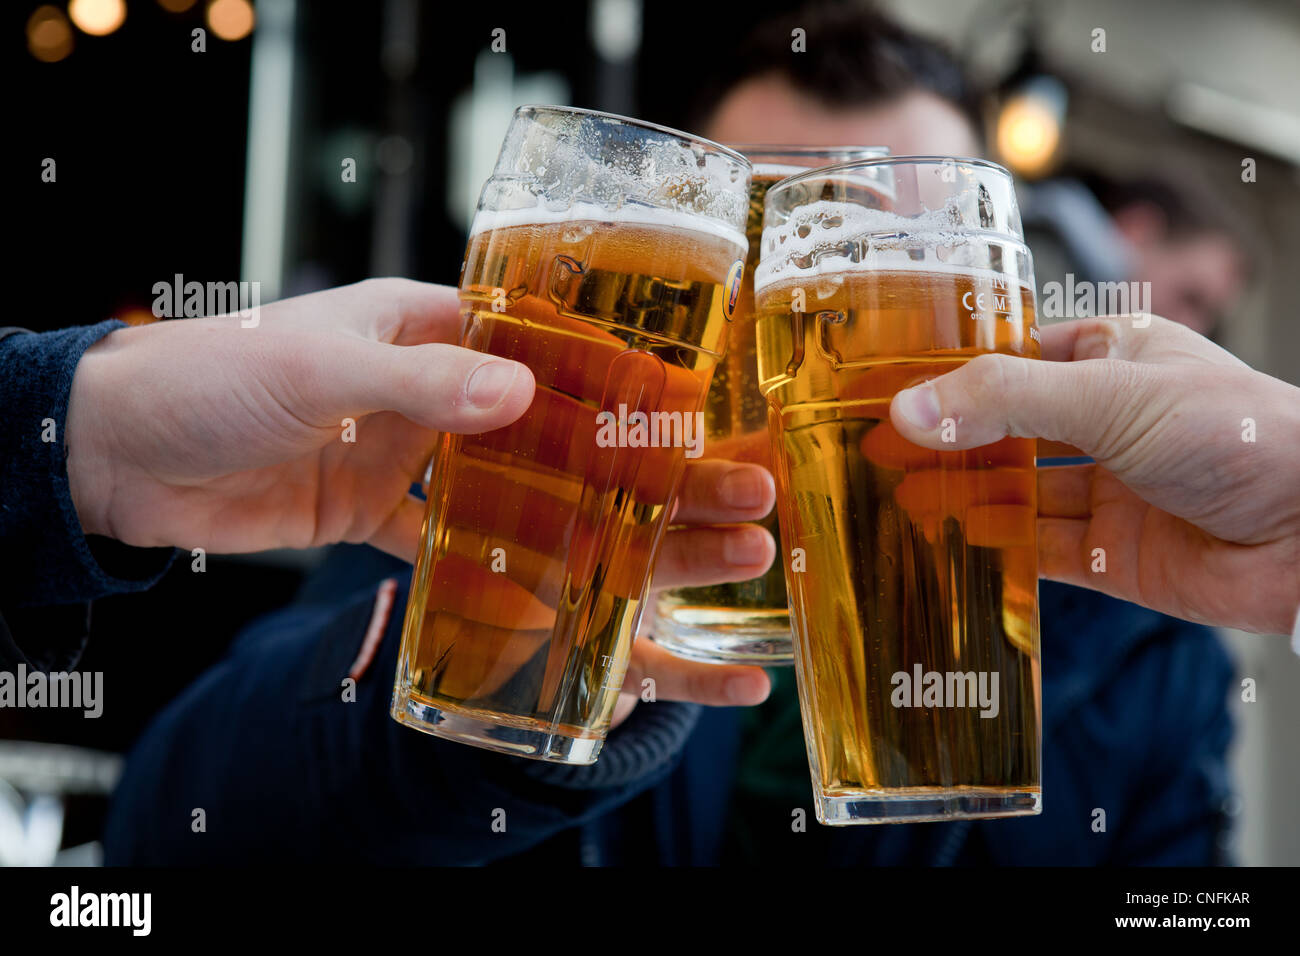 Glasses of beer Stock Photo